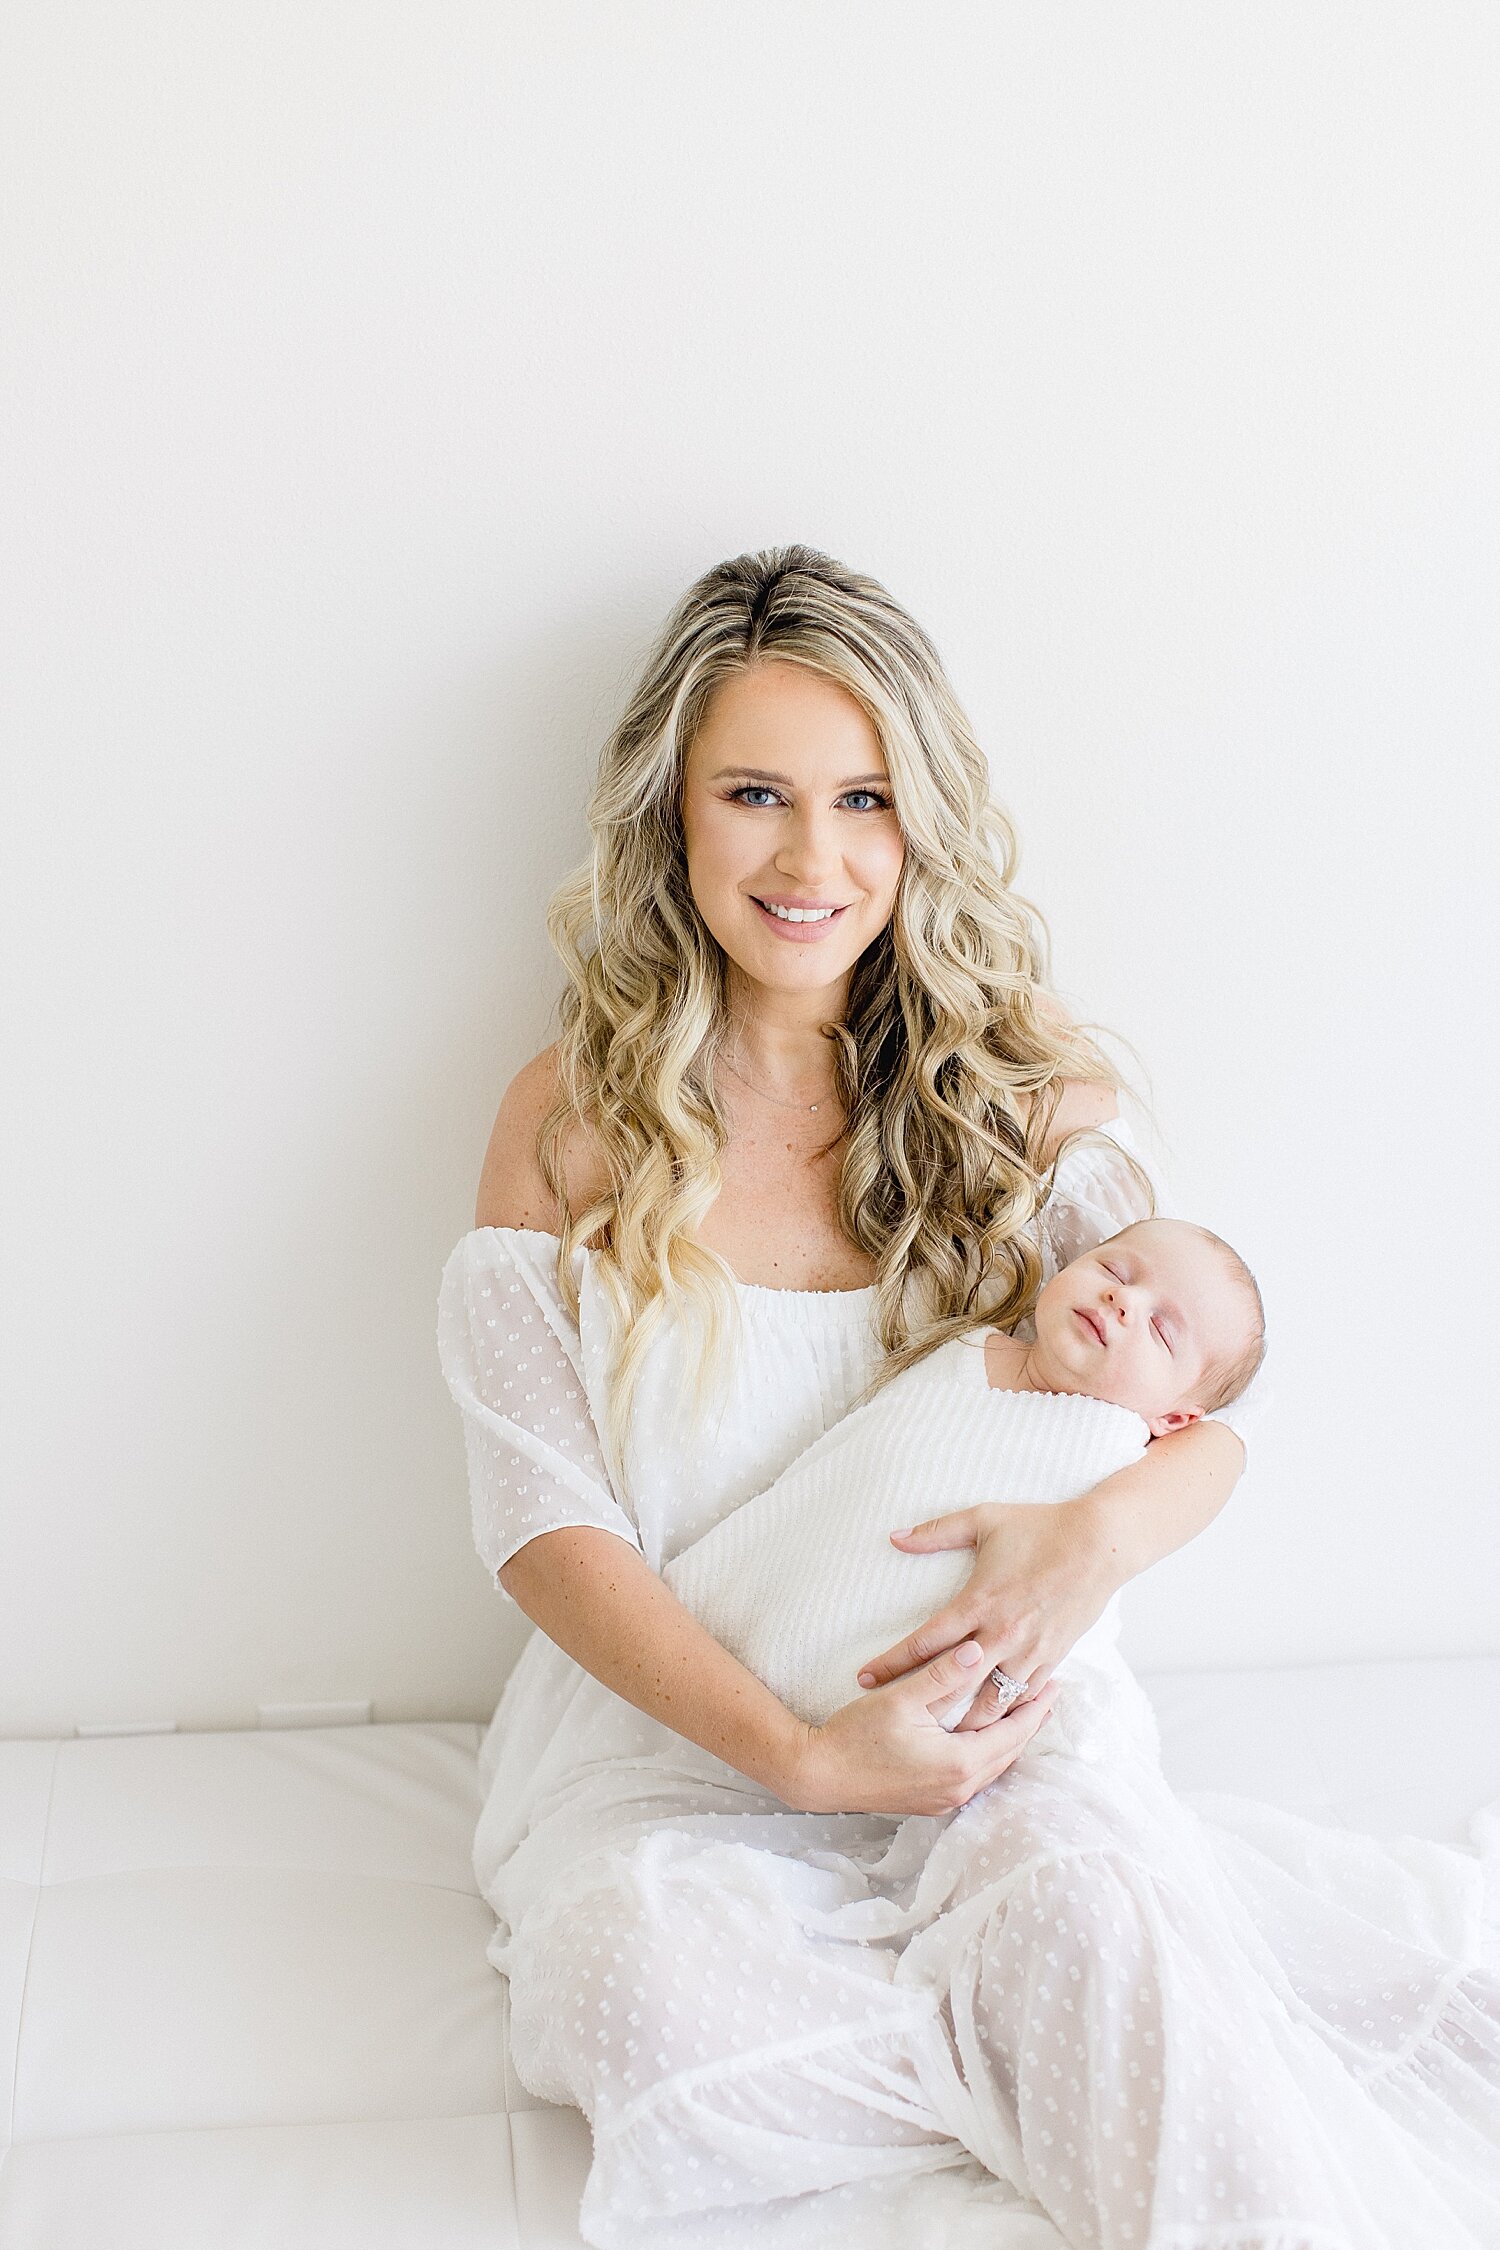 Mom with baby boy during newborn session in Newport Beach studio. Photo by Ambre Williams Photography.